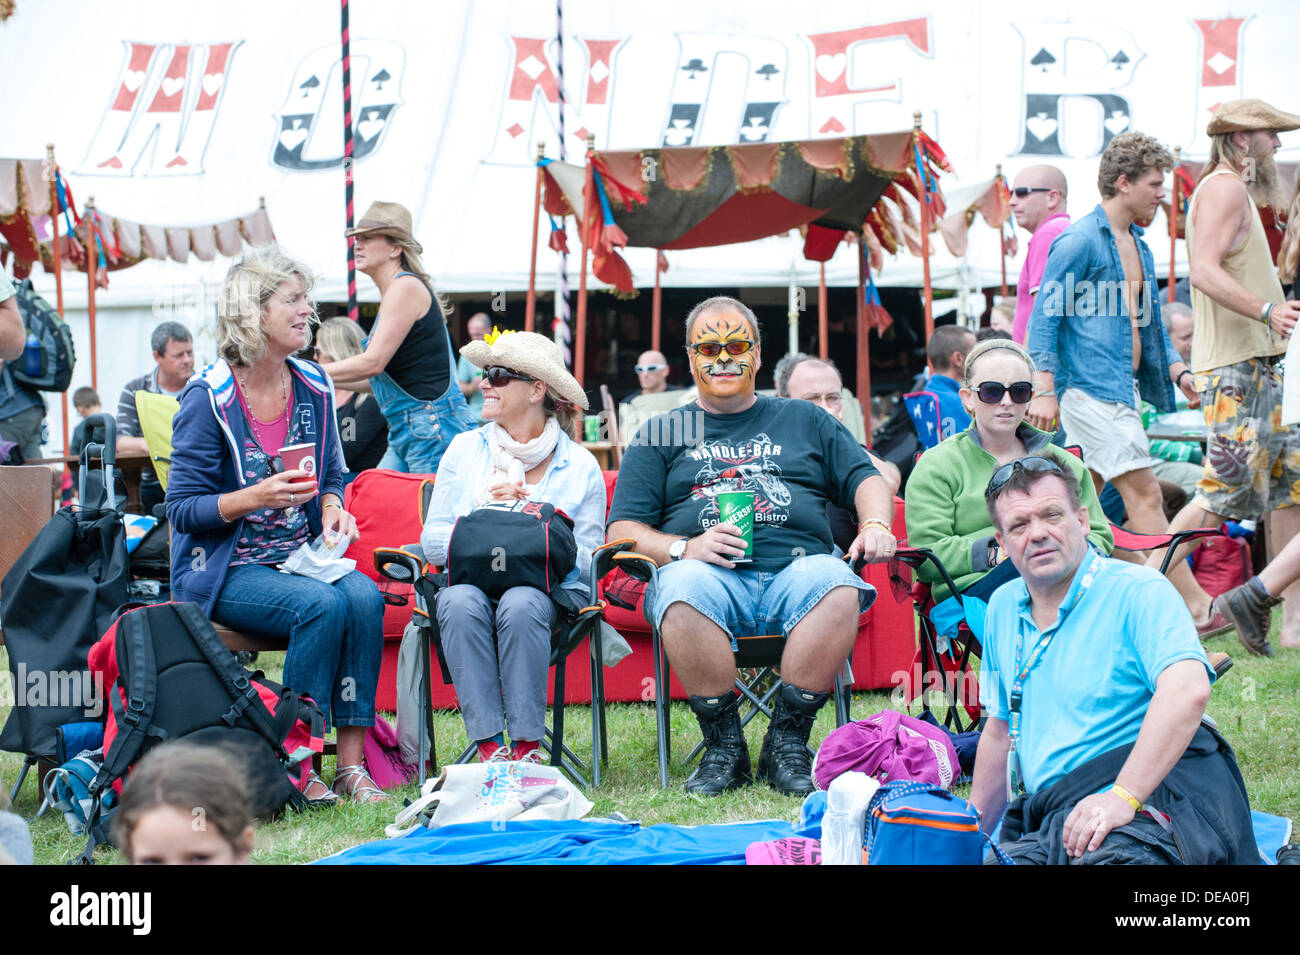 Middle-aged man with his face painted as a tiger and his mates drinking beer sitting at a music festival by flags and tents Stock Photo